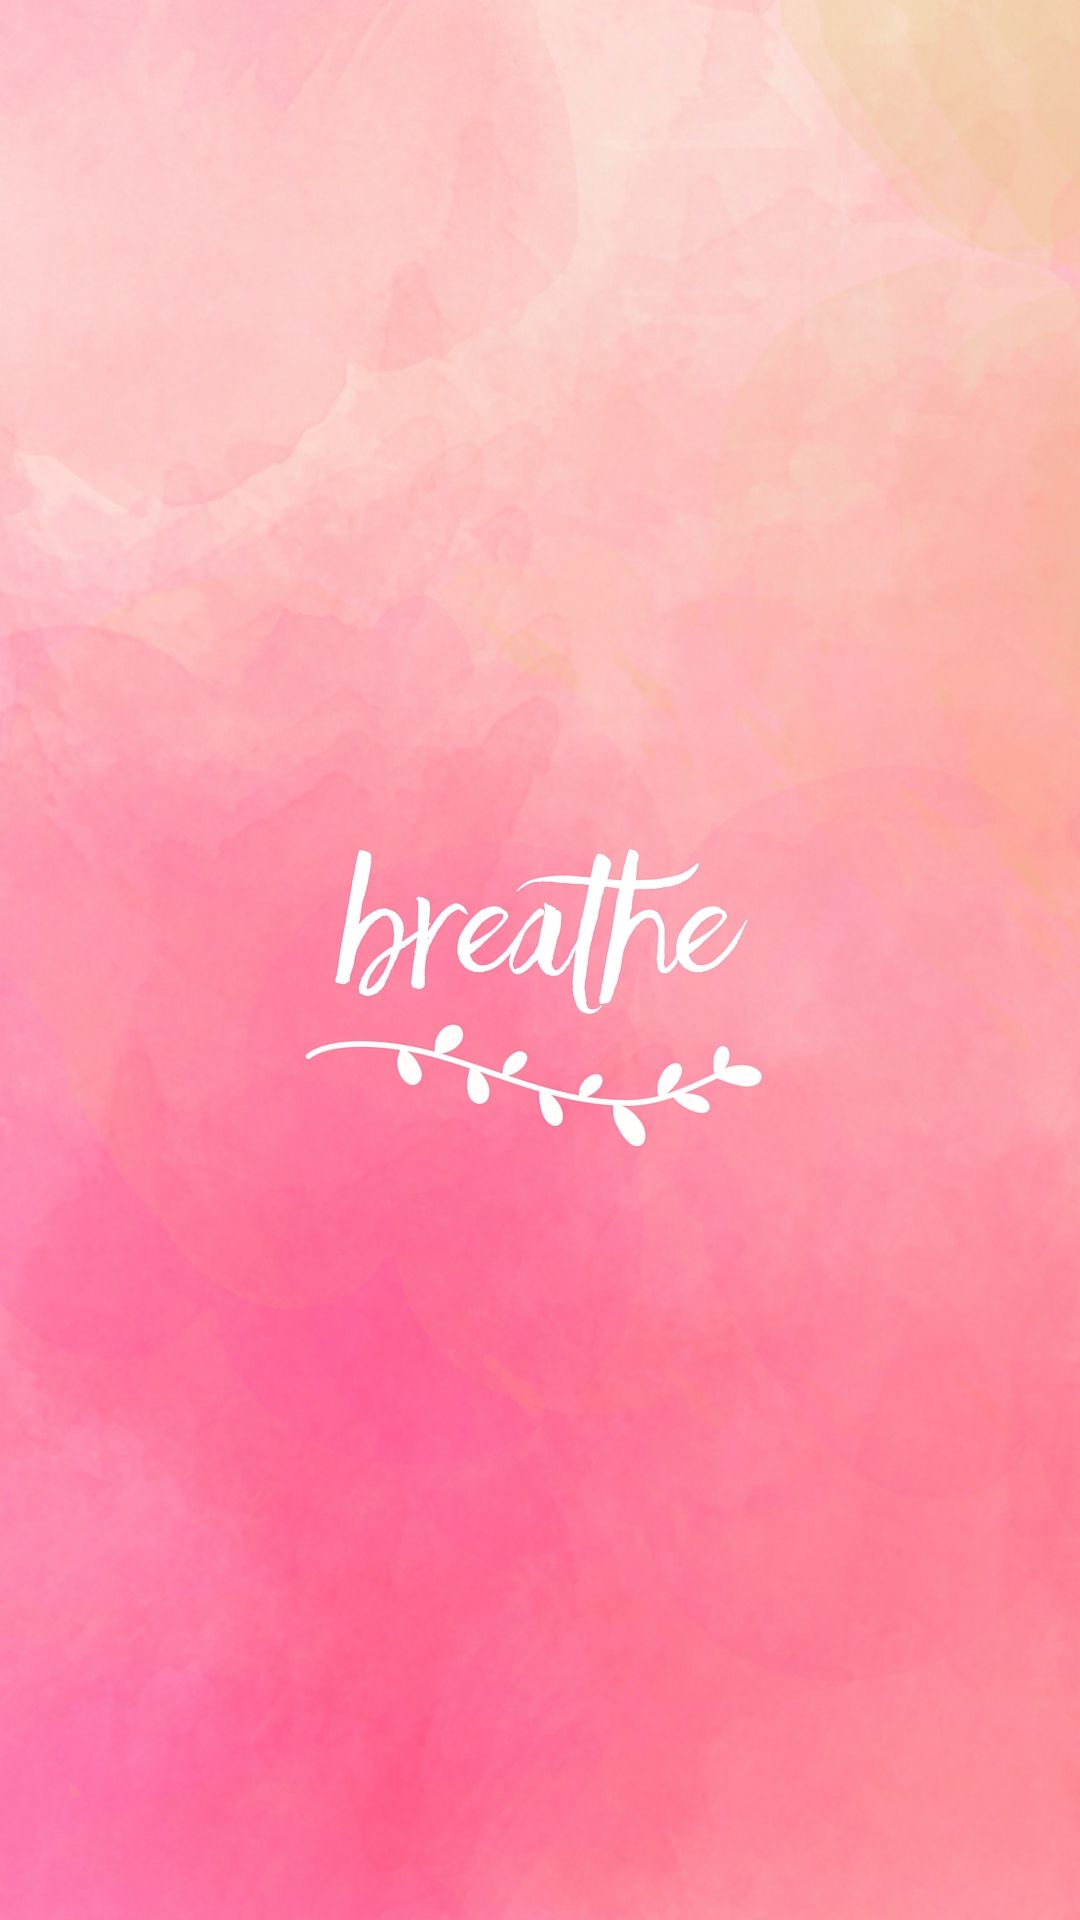 Breathe Phone backgrounds Wallpaper quotes Inspirational